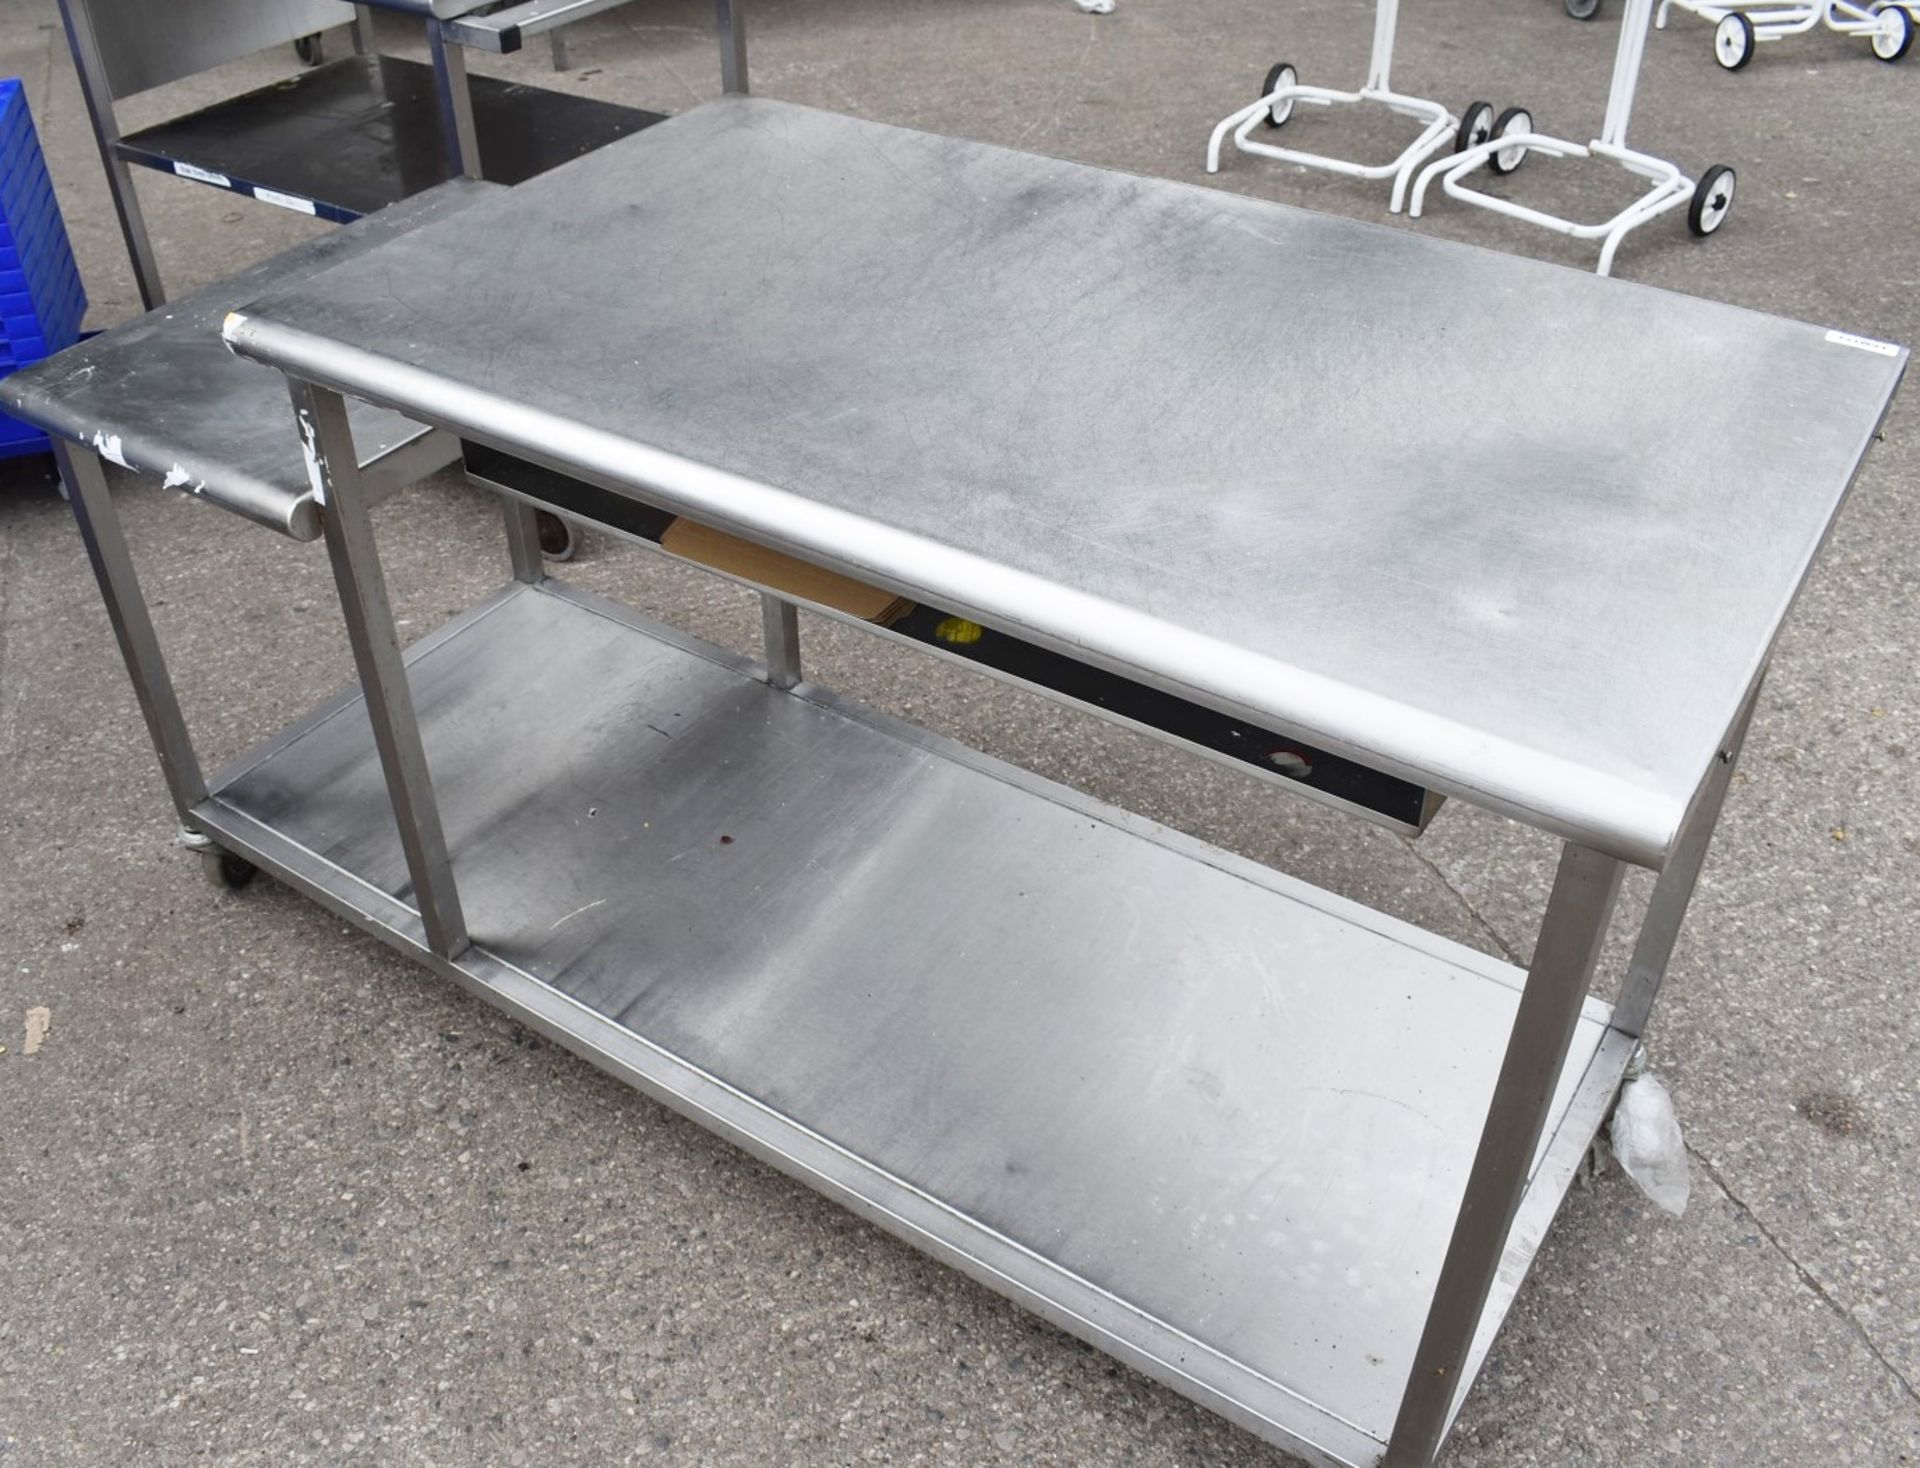 1 x Stainless Steel Prep Table on Castors Featuring Undershelf, Multi-Level Surface and Storage - Image 3 of 4